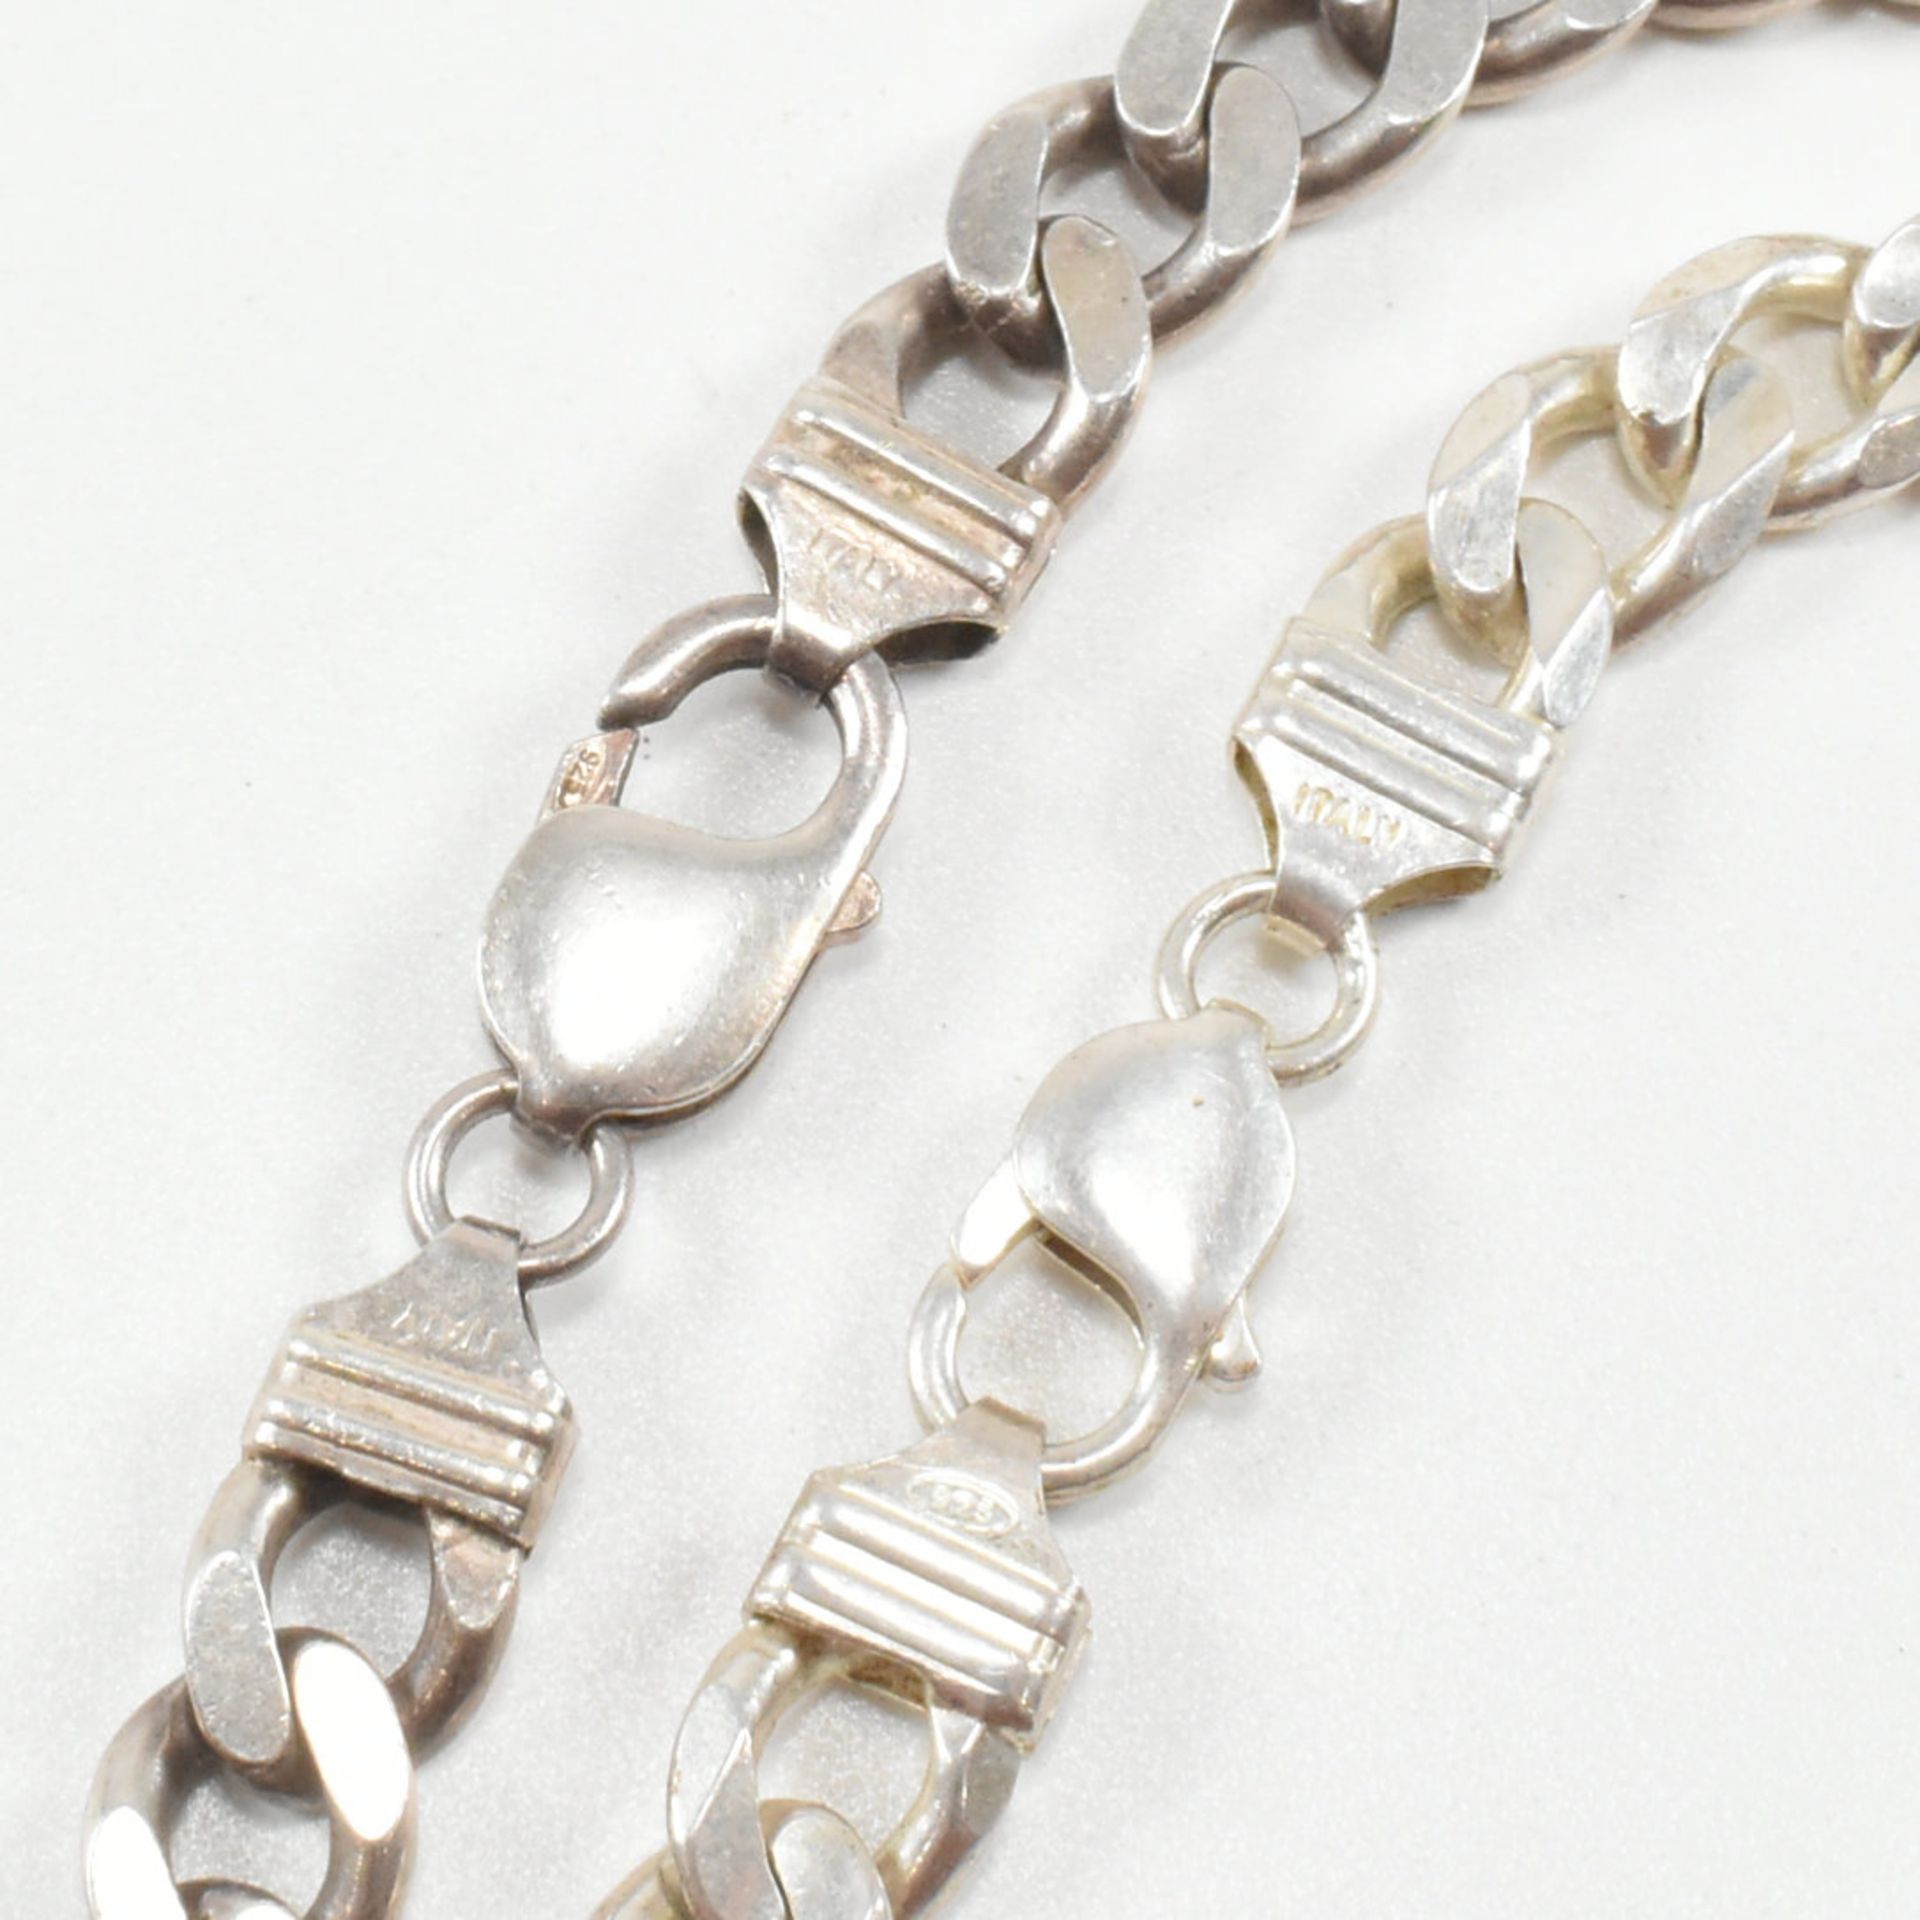 CONTEMPORARY ITALIAN 925 SILVER CURB LINK CHAIN & BRACELET - Image 4 of 7